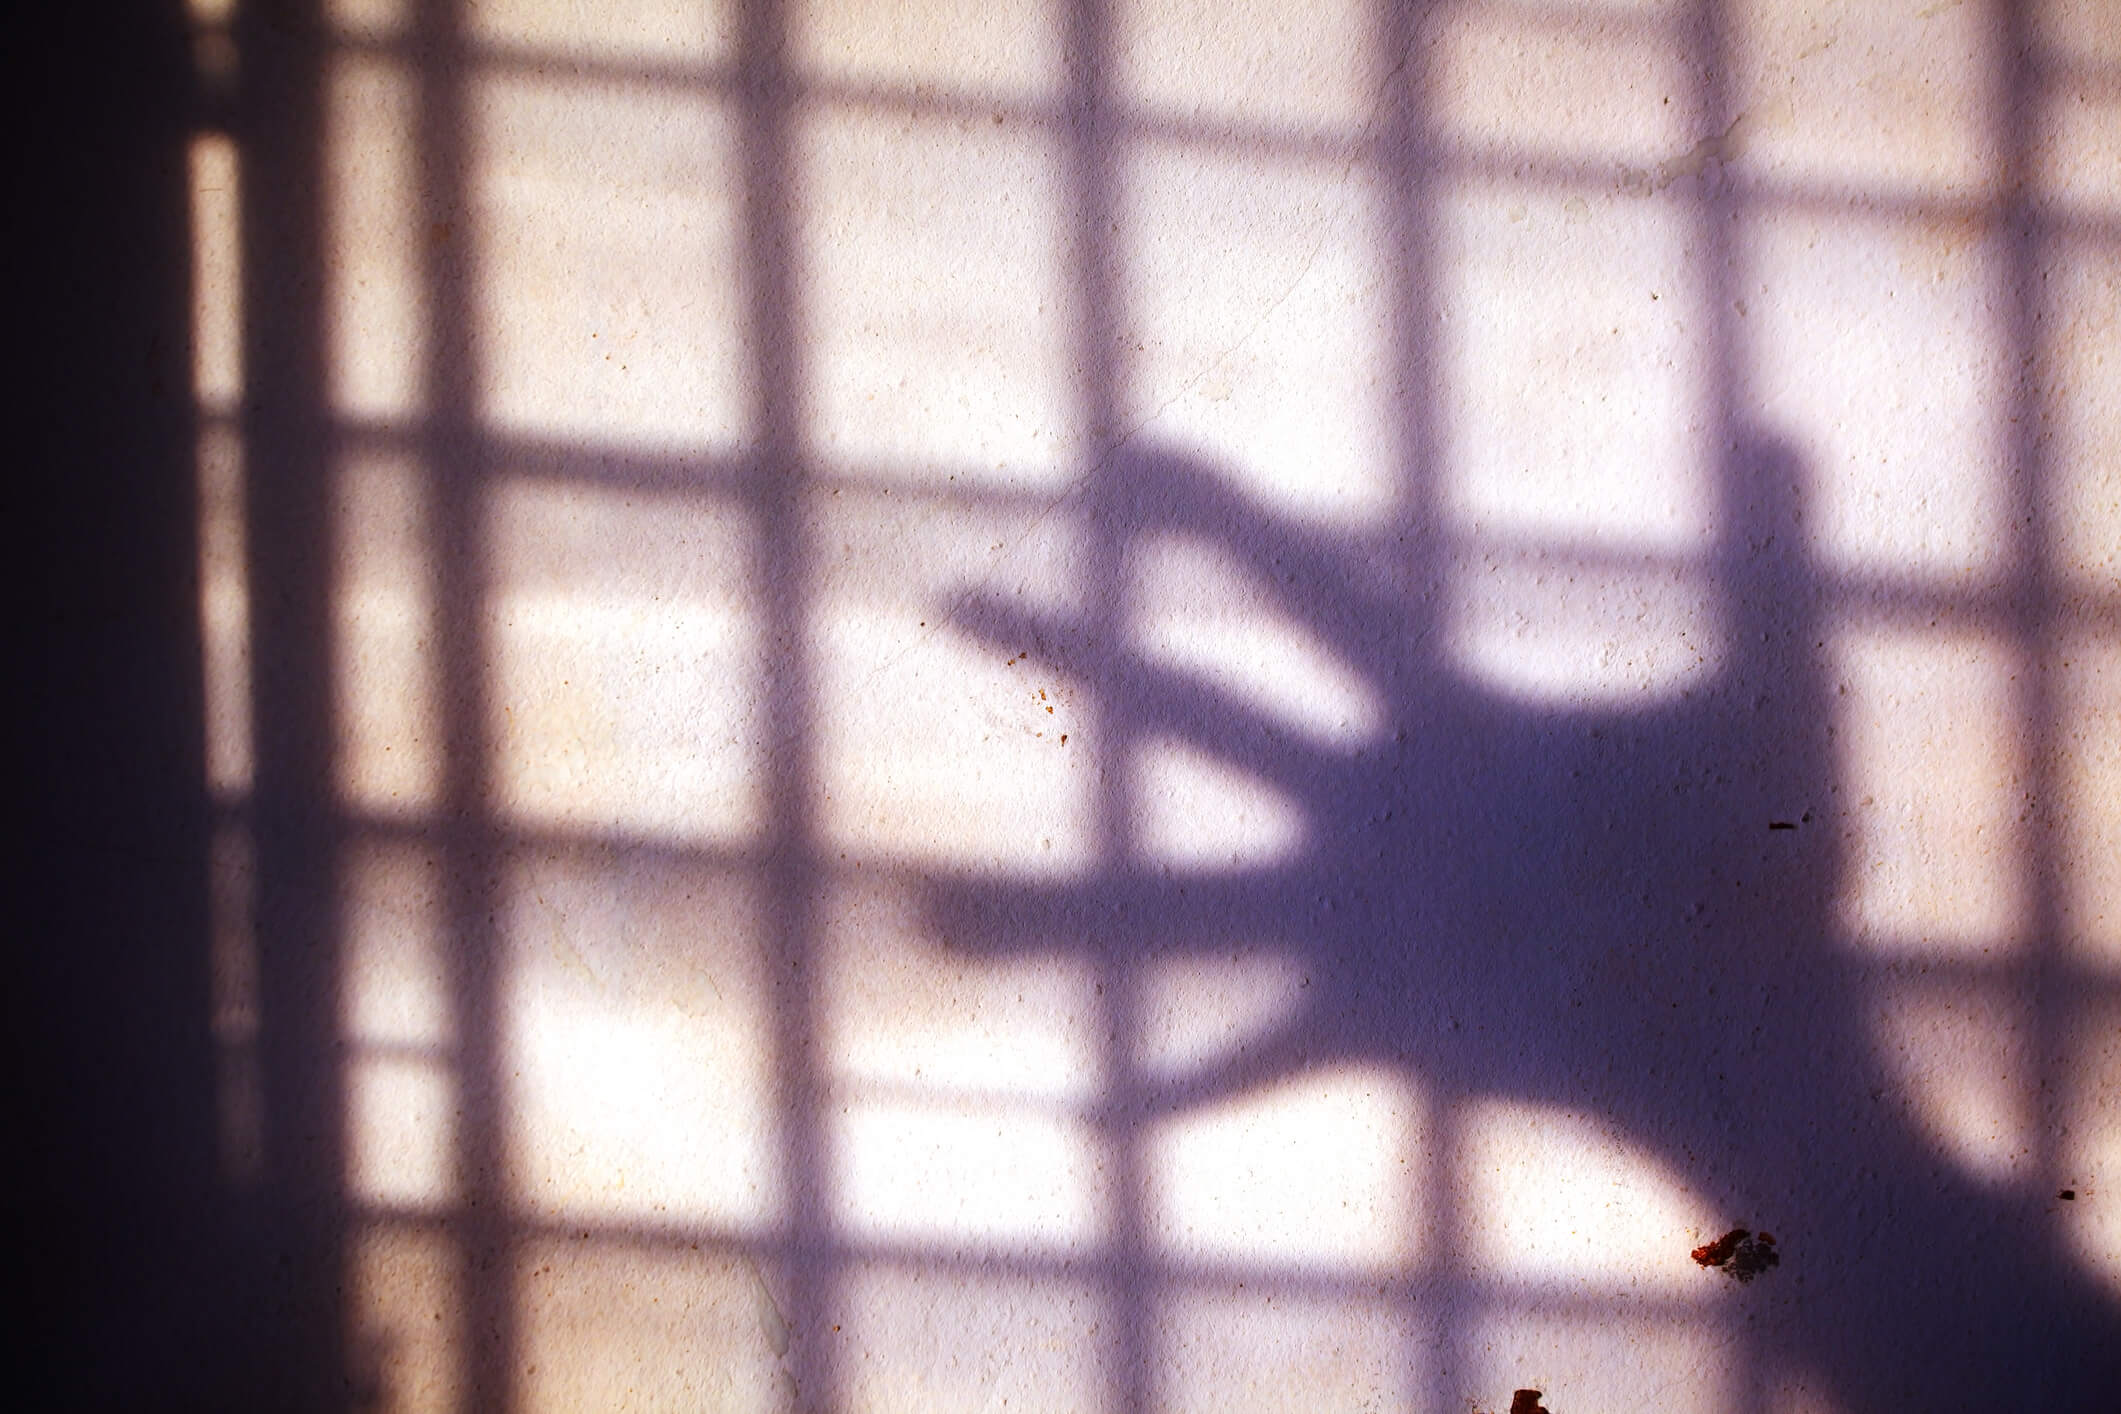 Silhouette of a hand in captivity.